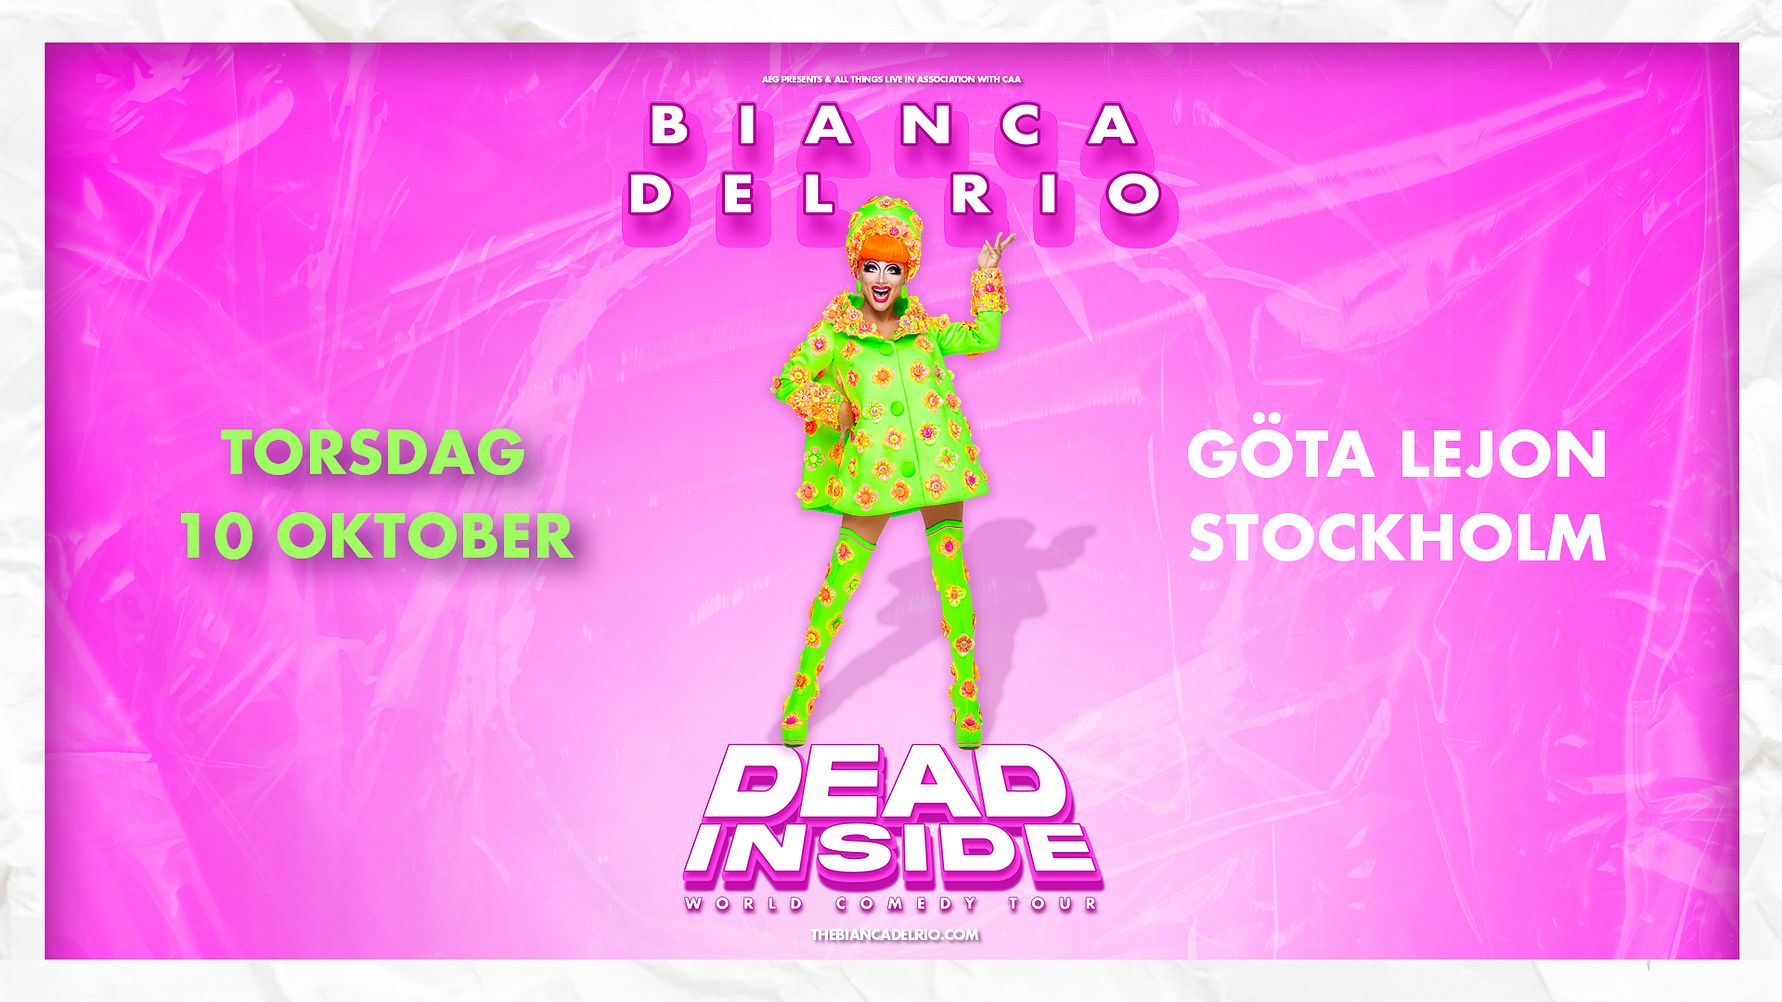 Bianca Del Rio returns to Sweden with her new comedy show “Dead Inside”